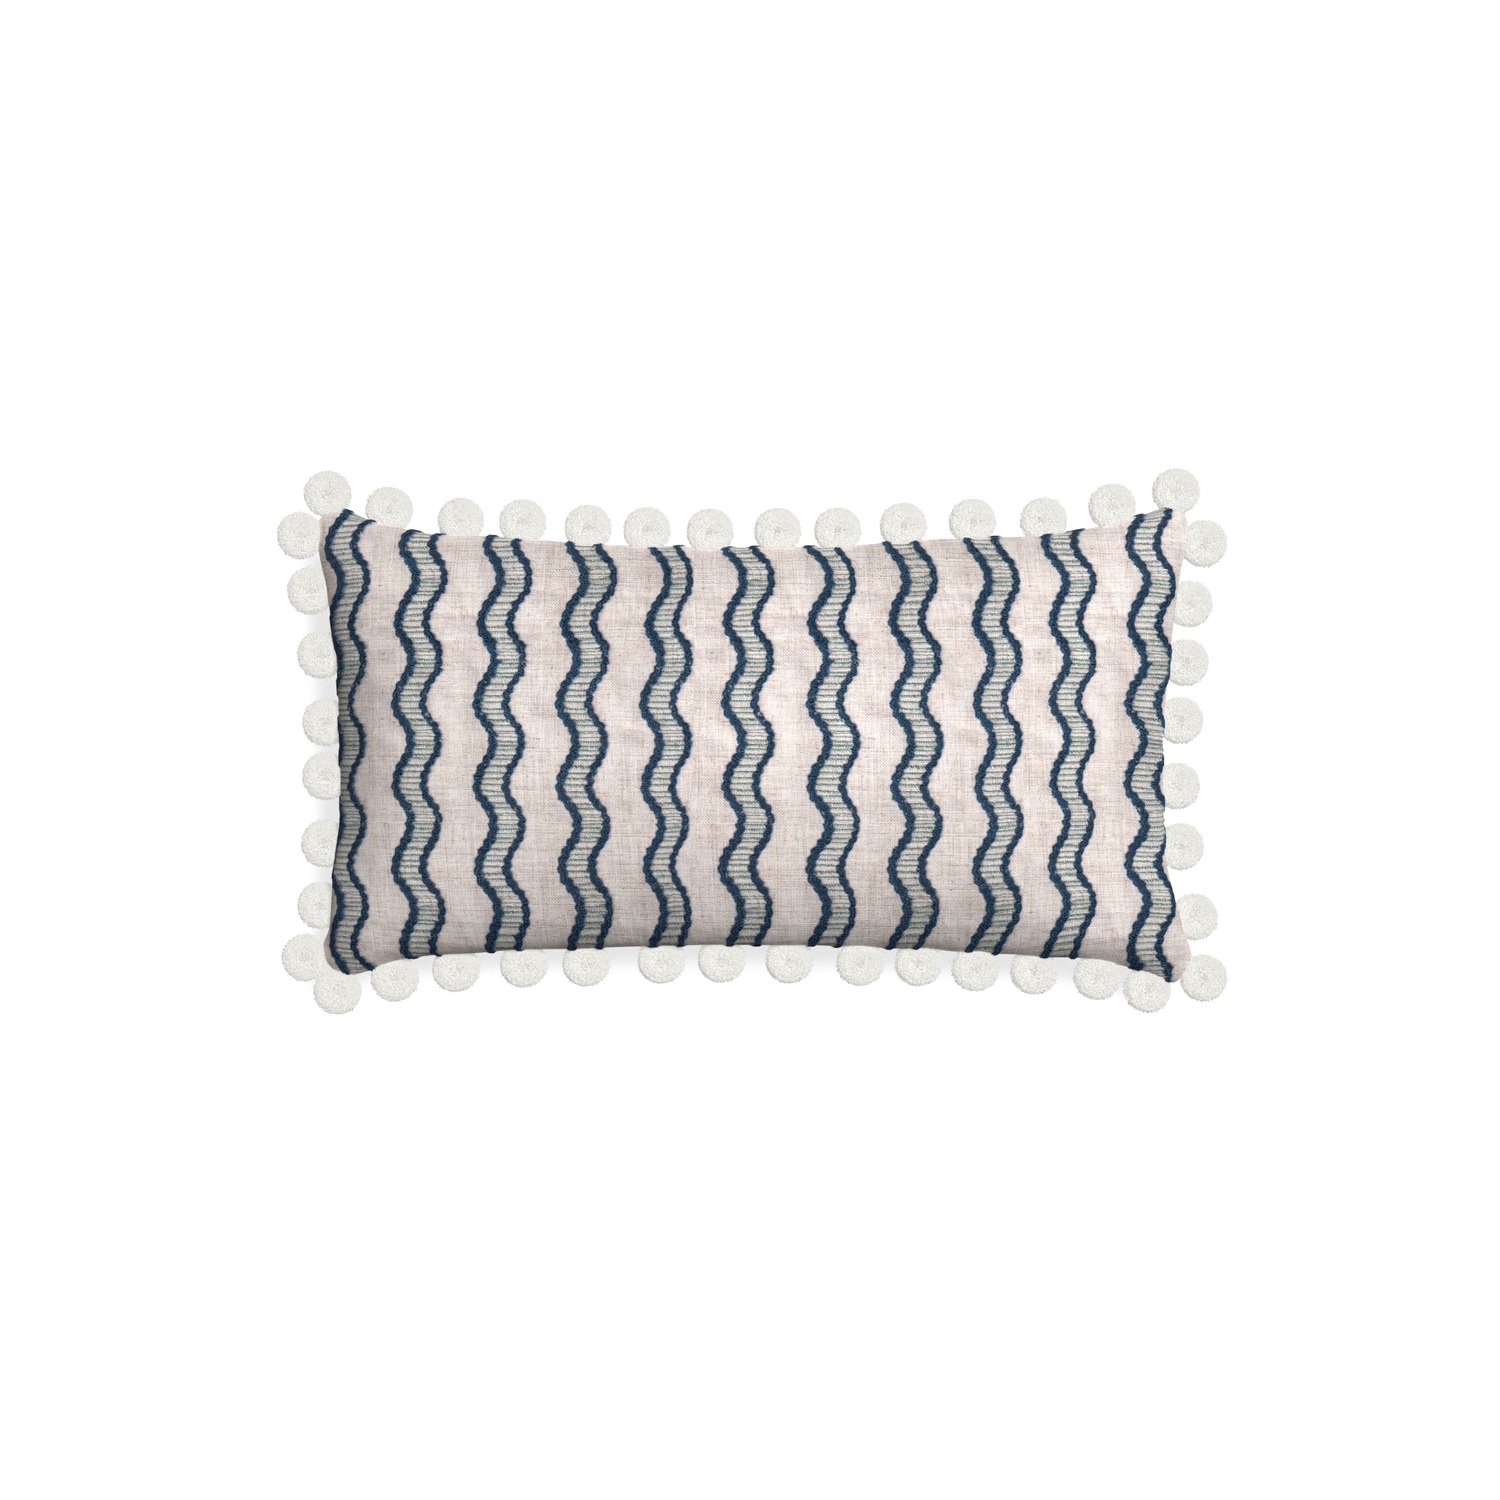 Petite-lumbar beatrice custom embroidered wavepillow with snow pom pom on white background